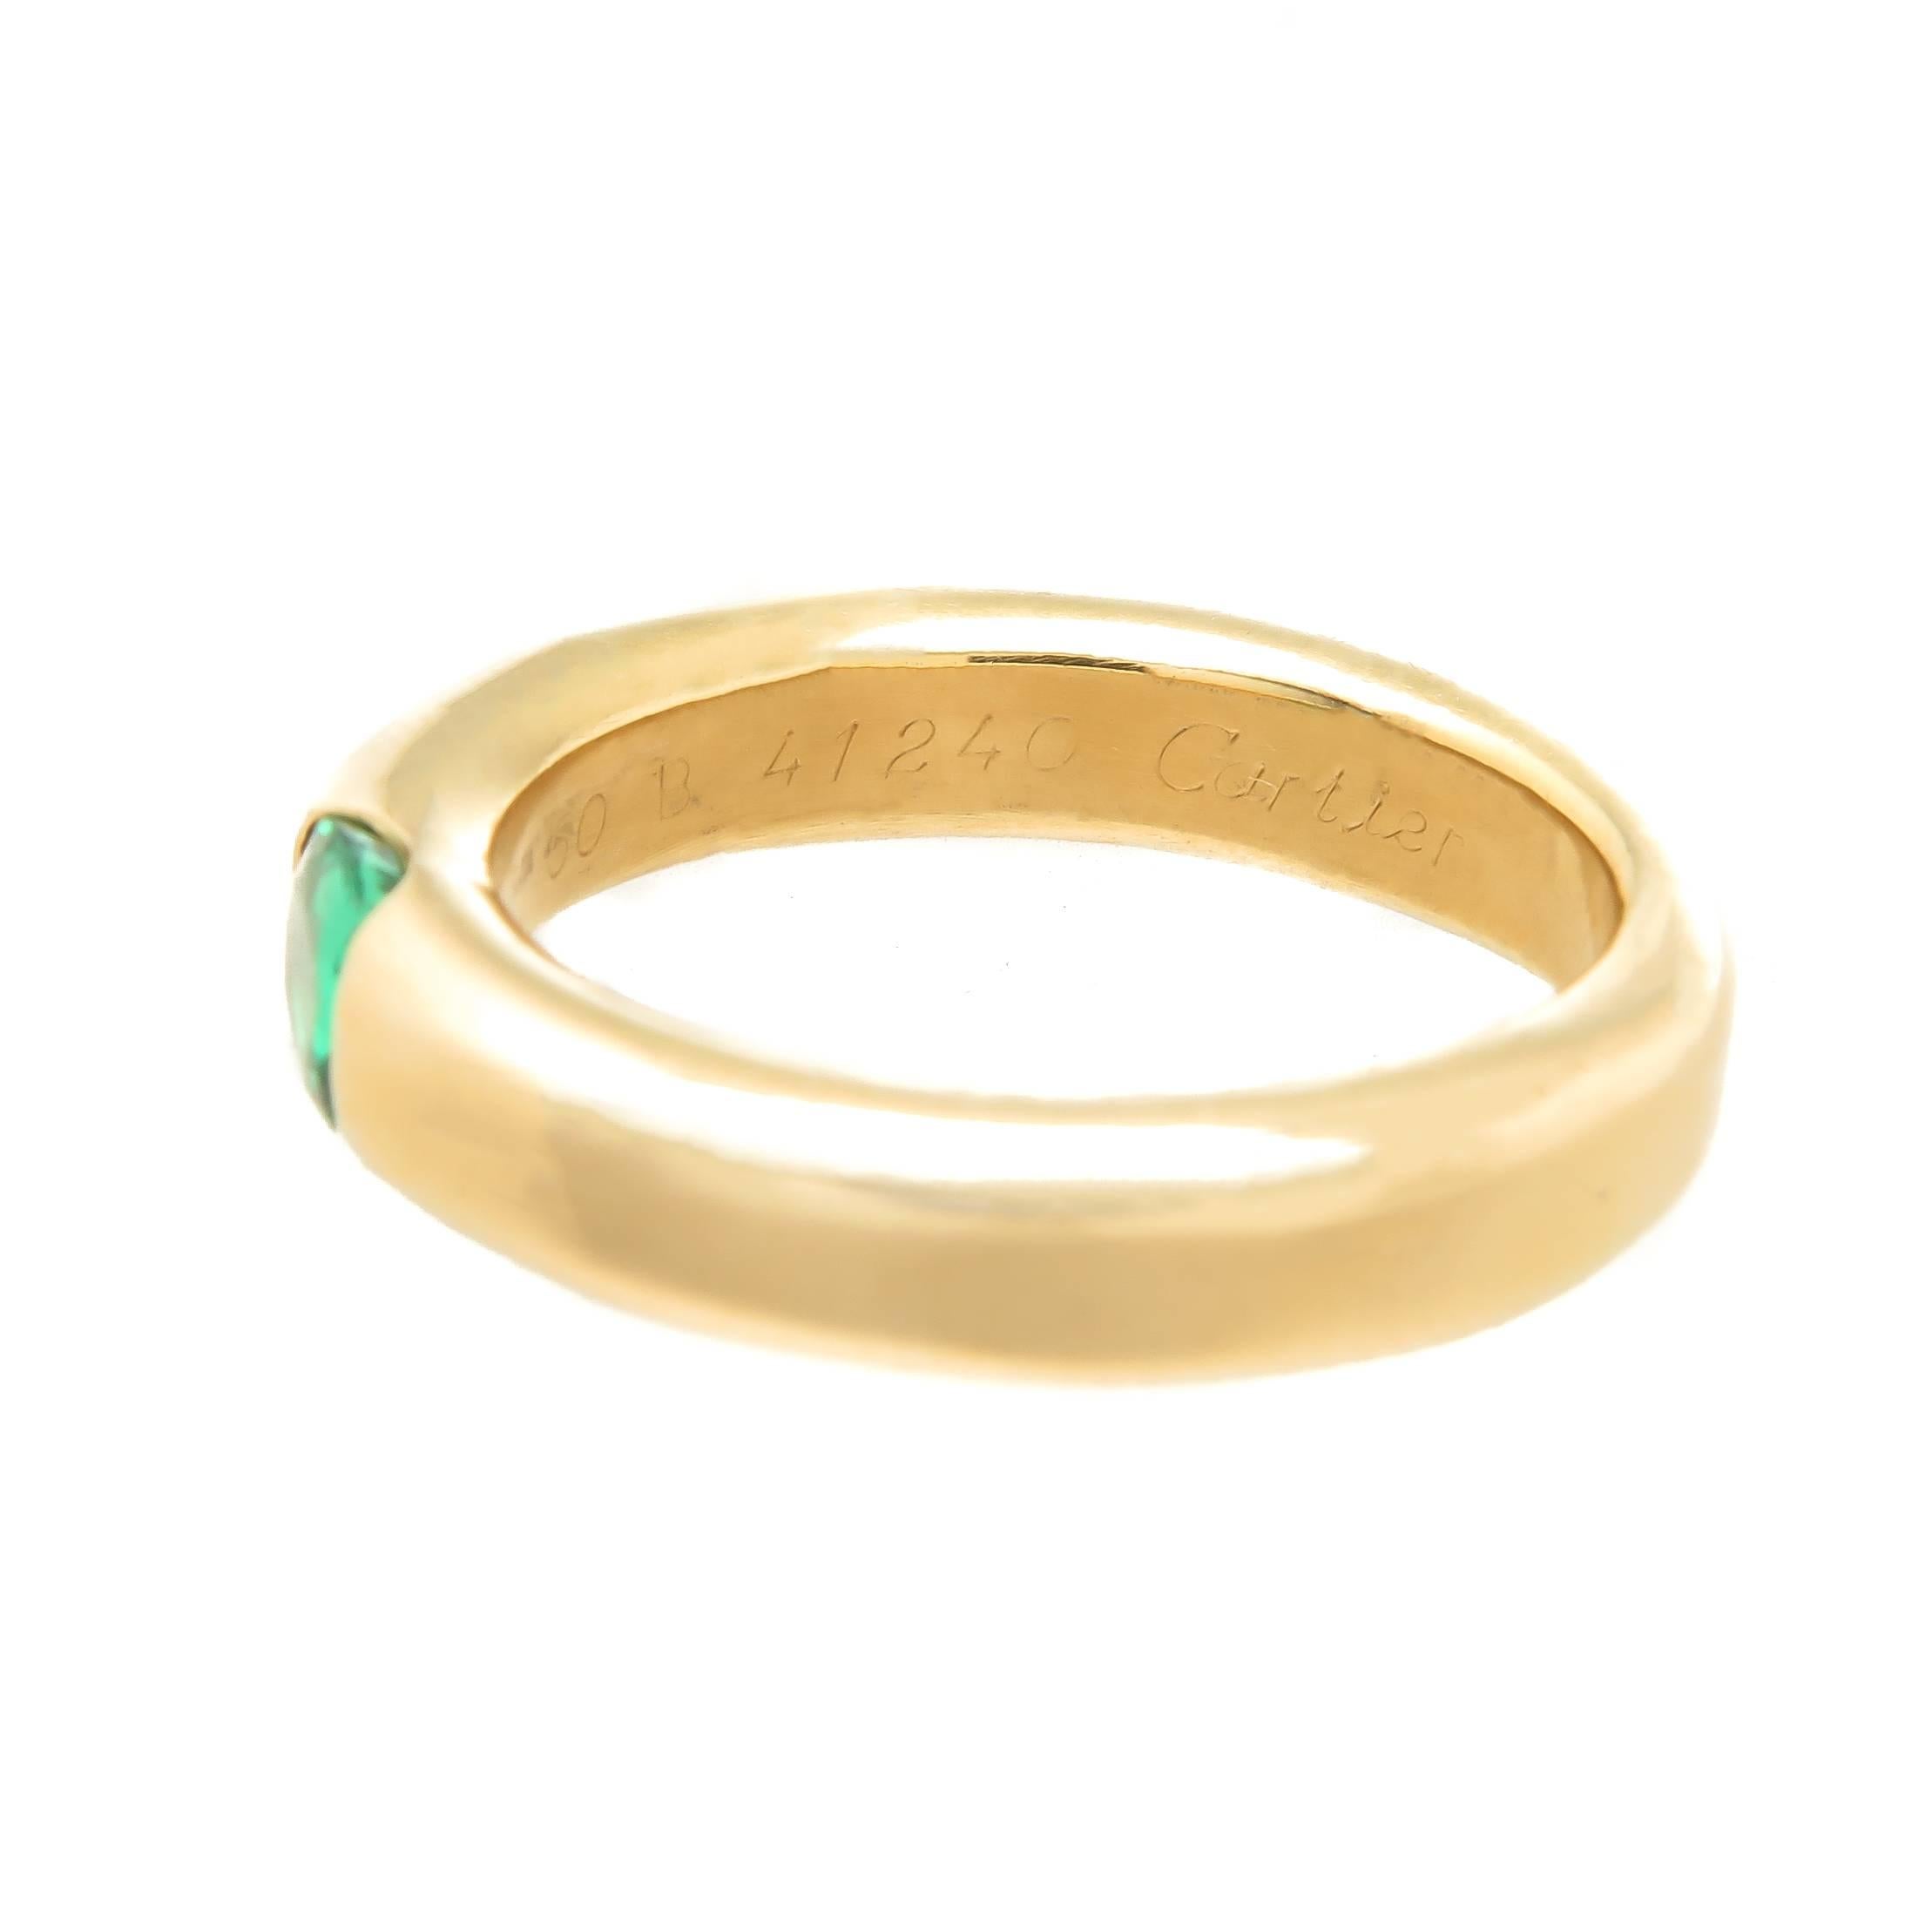 Circa 2000 Cartier Ellipse collection Stacking Band Ring, the 3.5 M.M. thick Ring is centrally set with a fine color Oval shape Emerald of approximately 1 carat. Finger size =  5 1/2. Excellent condition, fully signed and numbered.